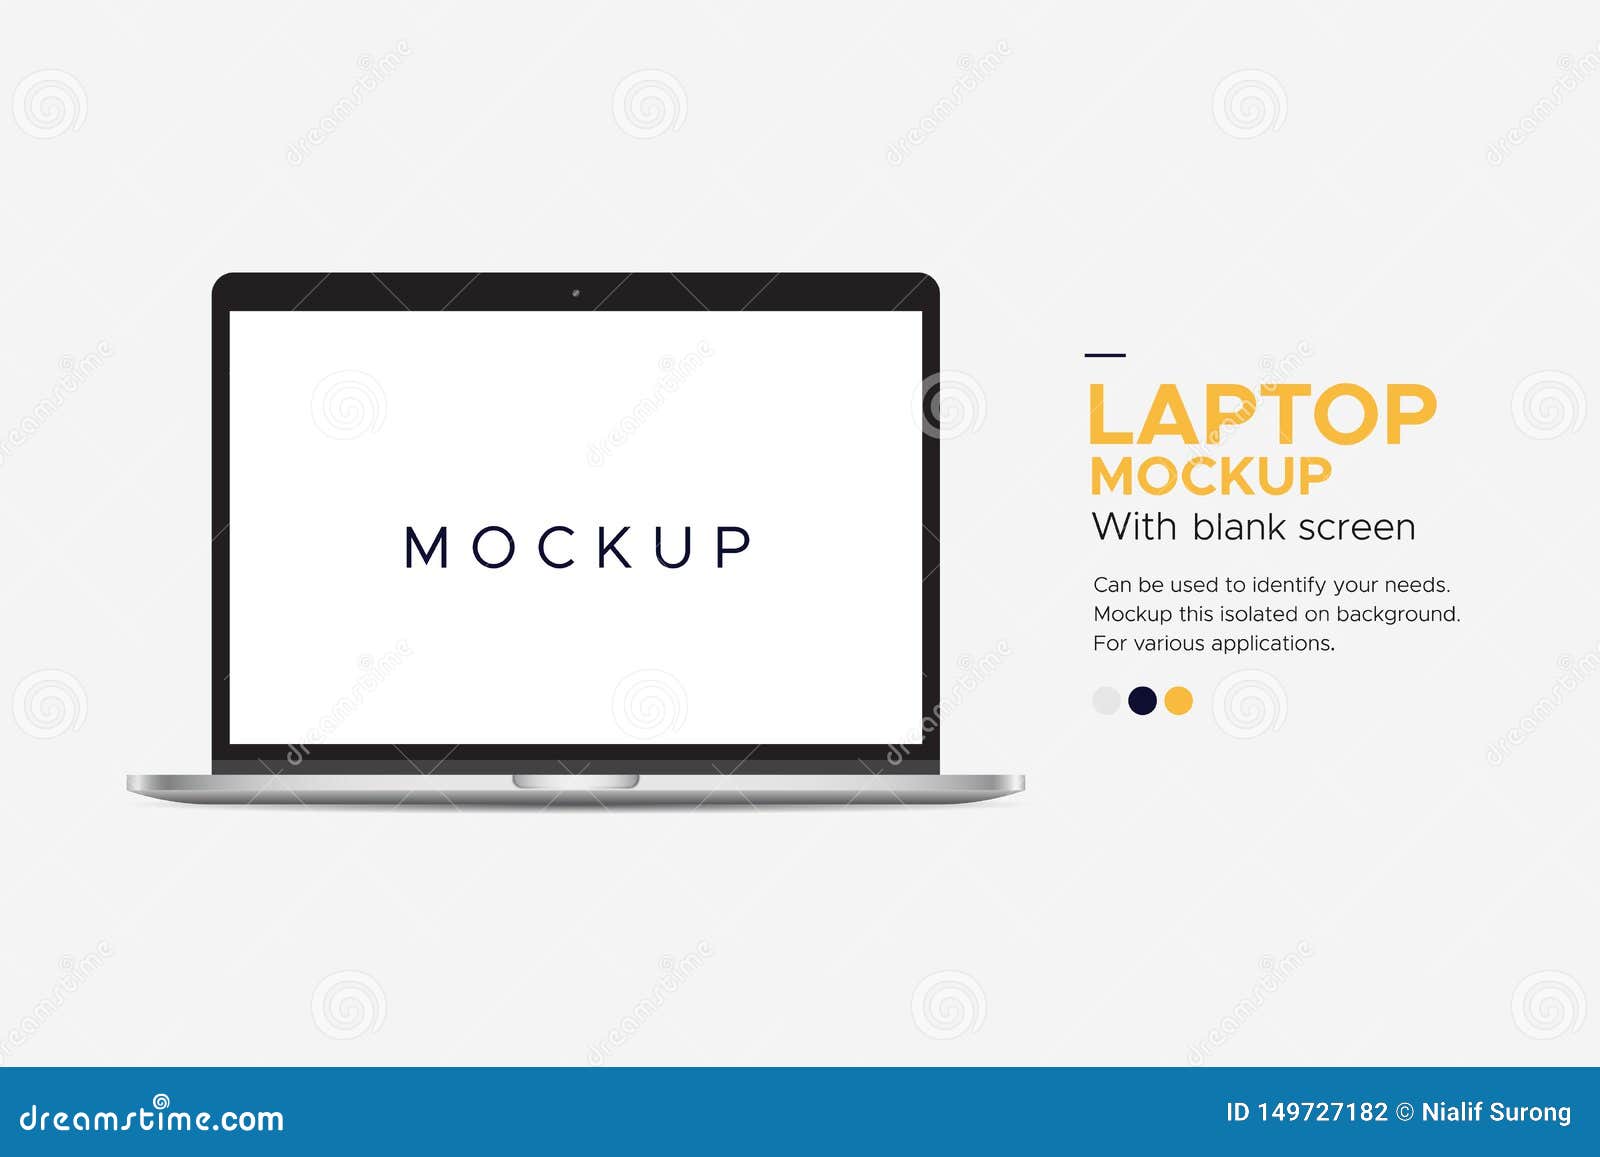 laptop imac mockup banner with blank screen  on background